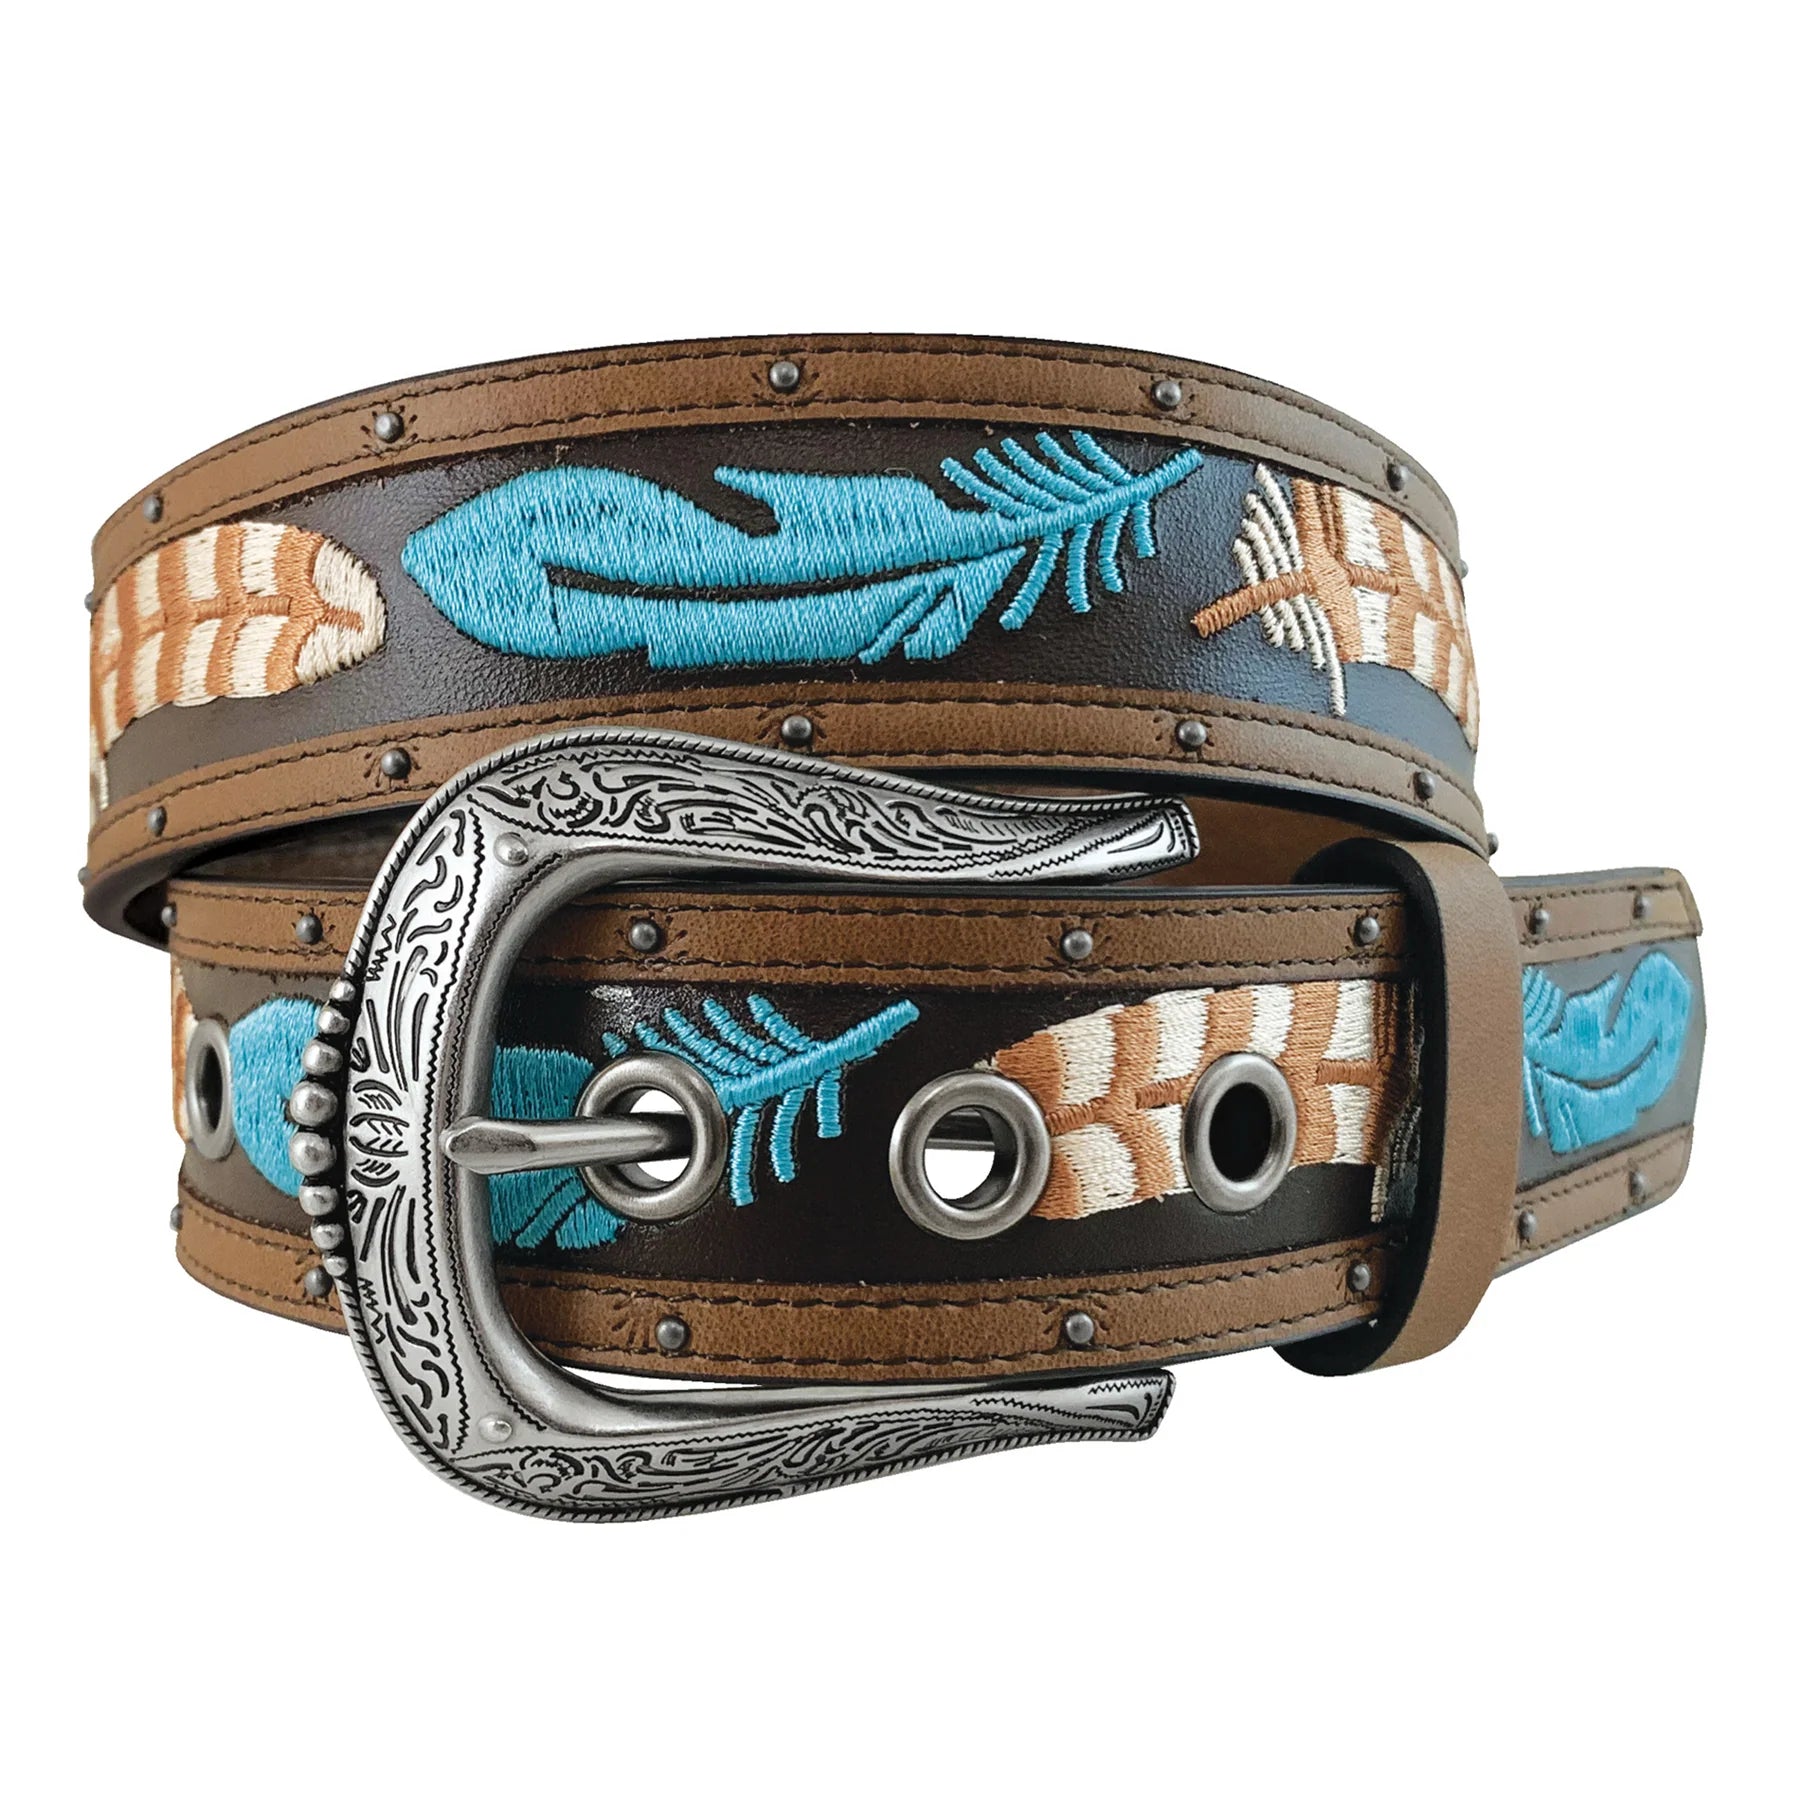 Roper Wmns Belt 1.5in Genuine Buffalo Leather Brown - Clearance